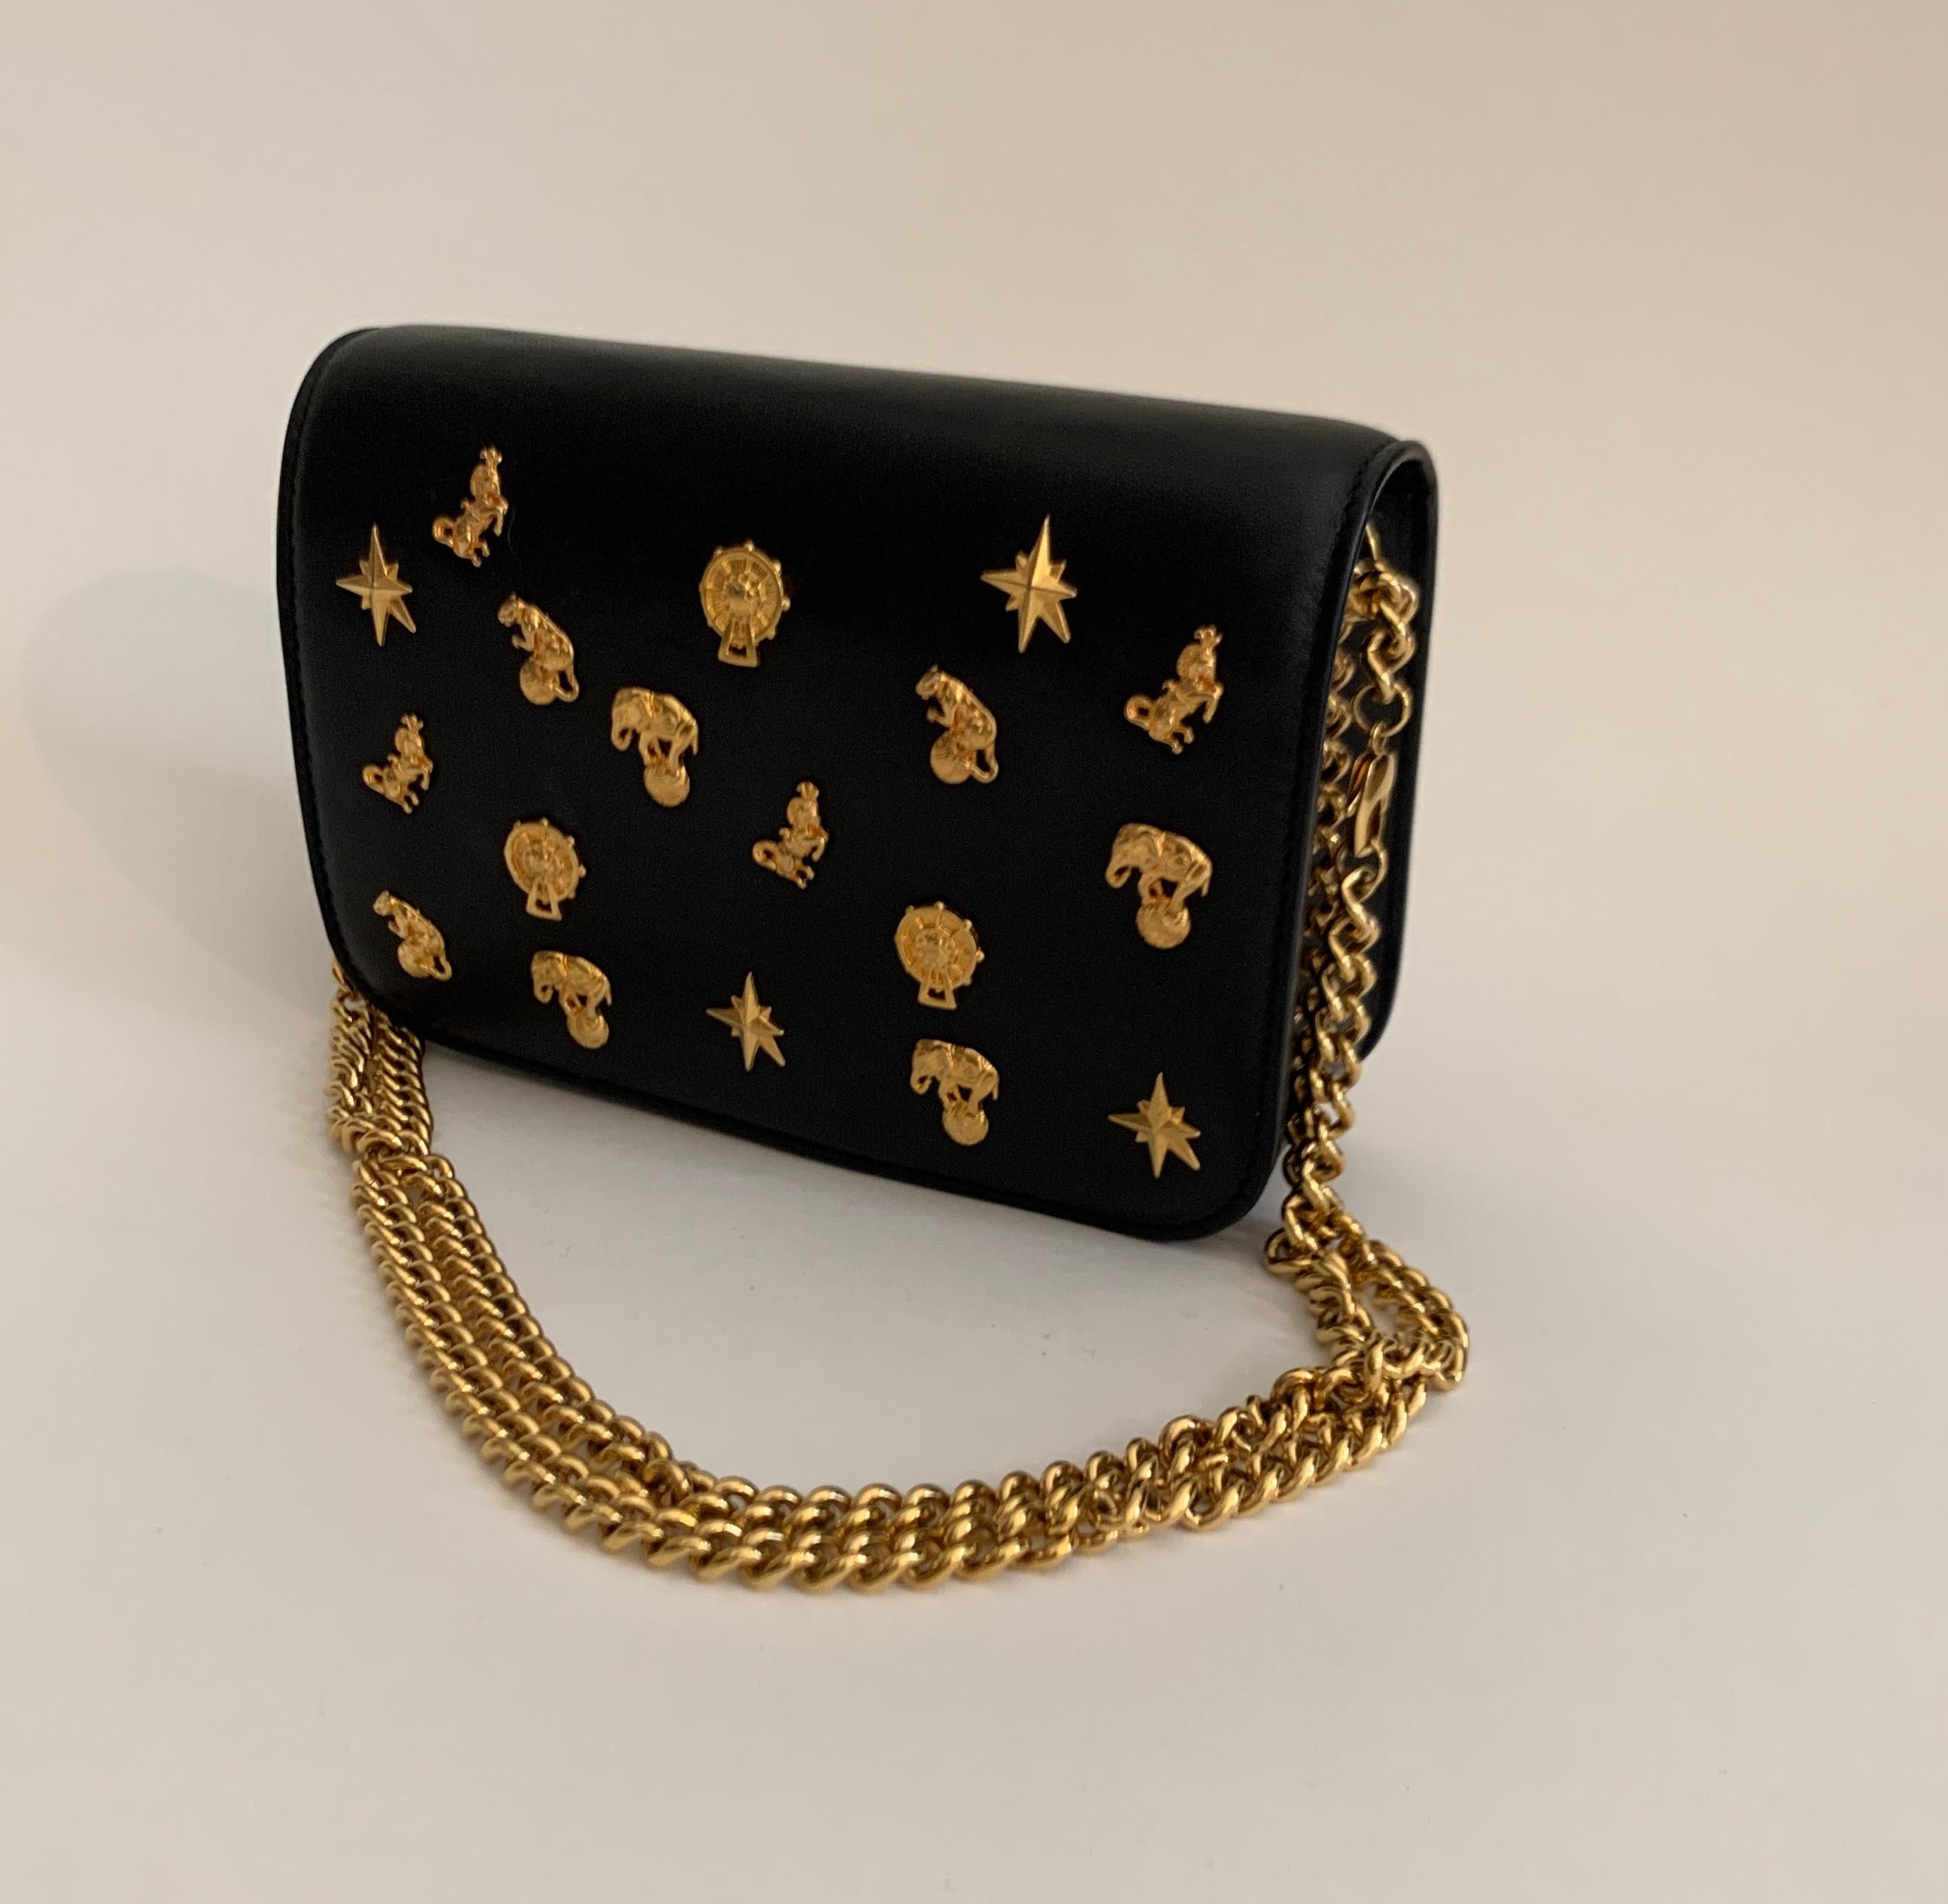 Roberto Cavalli circus bag in black leather with gold tone hardware. Gold detail on front features Ferris wheels and circus animals including elephants, leopards, and horses. Removable gold chain strap that can be worn long or doubled. Lined in a